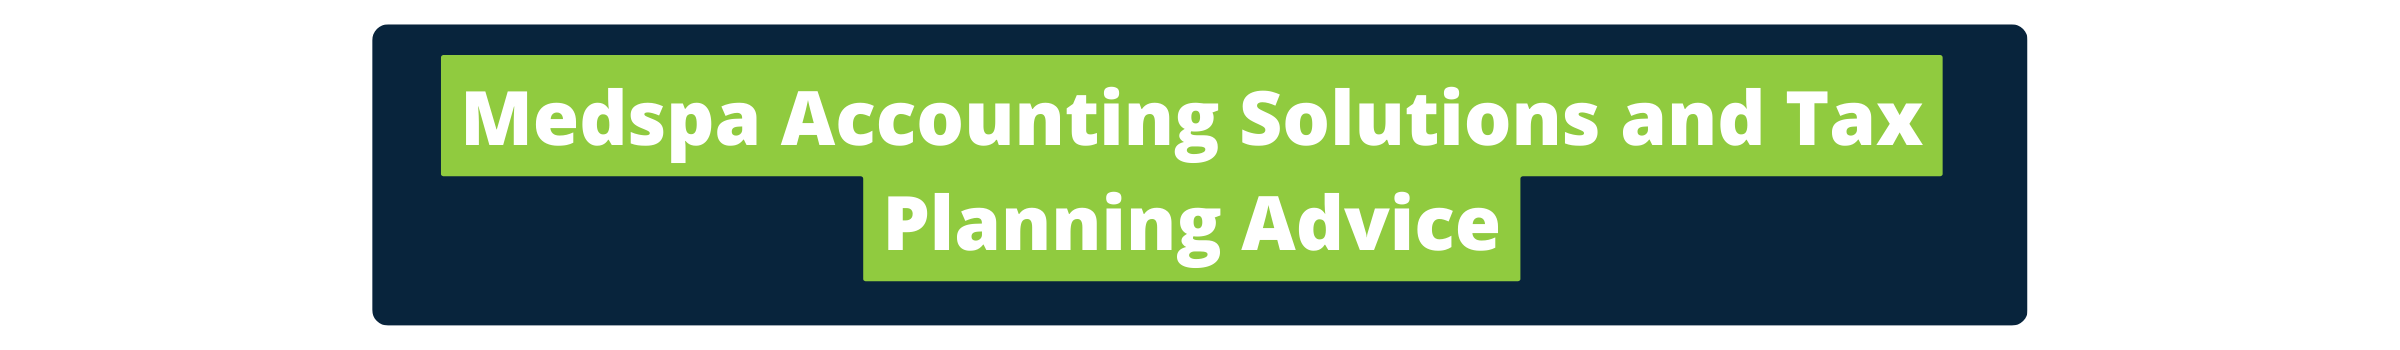 Medspa Accounting Solutions and Tax Planning Advice